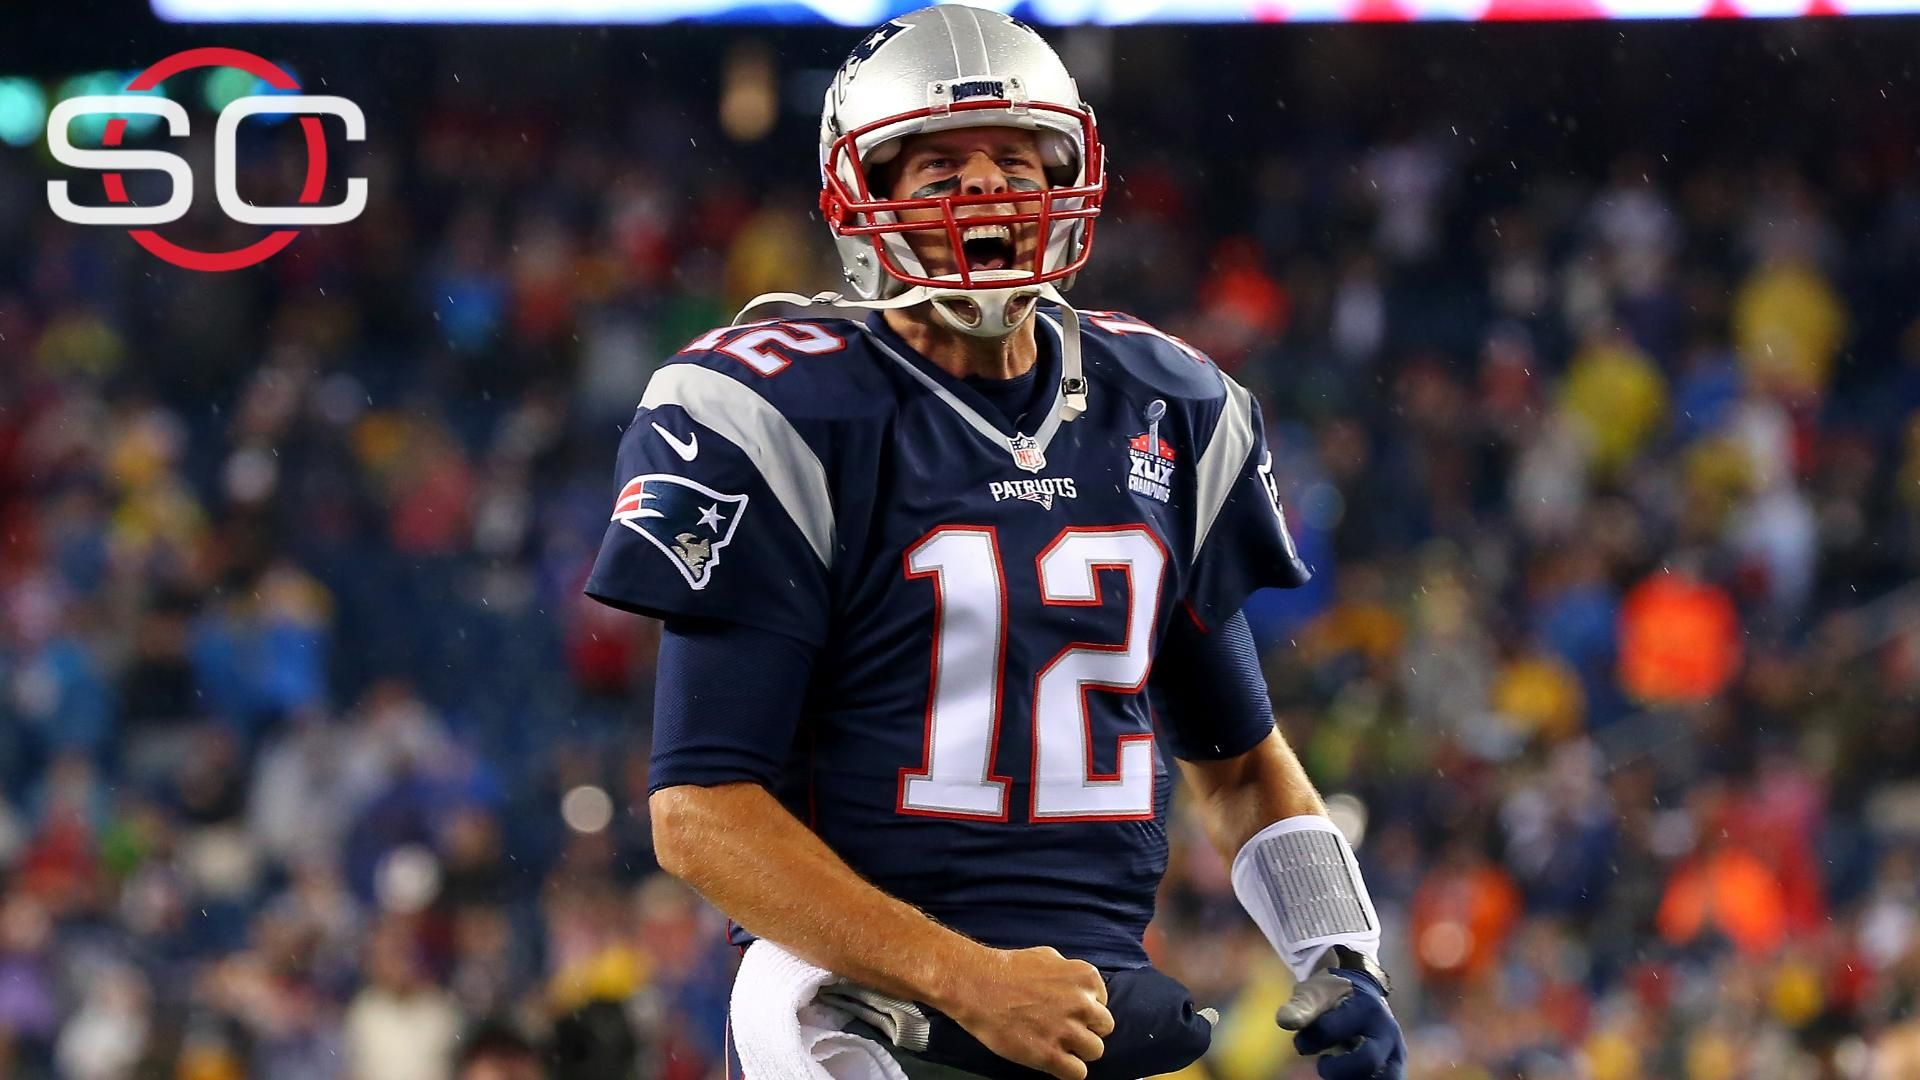 Tom Brady last game jersey: The football jersey is headed to